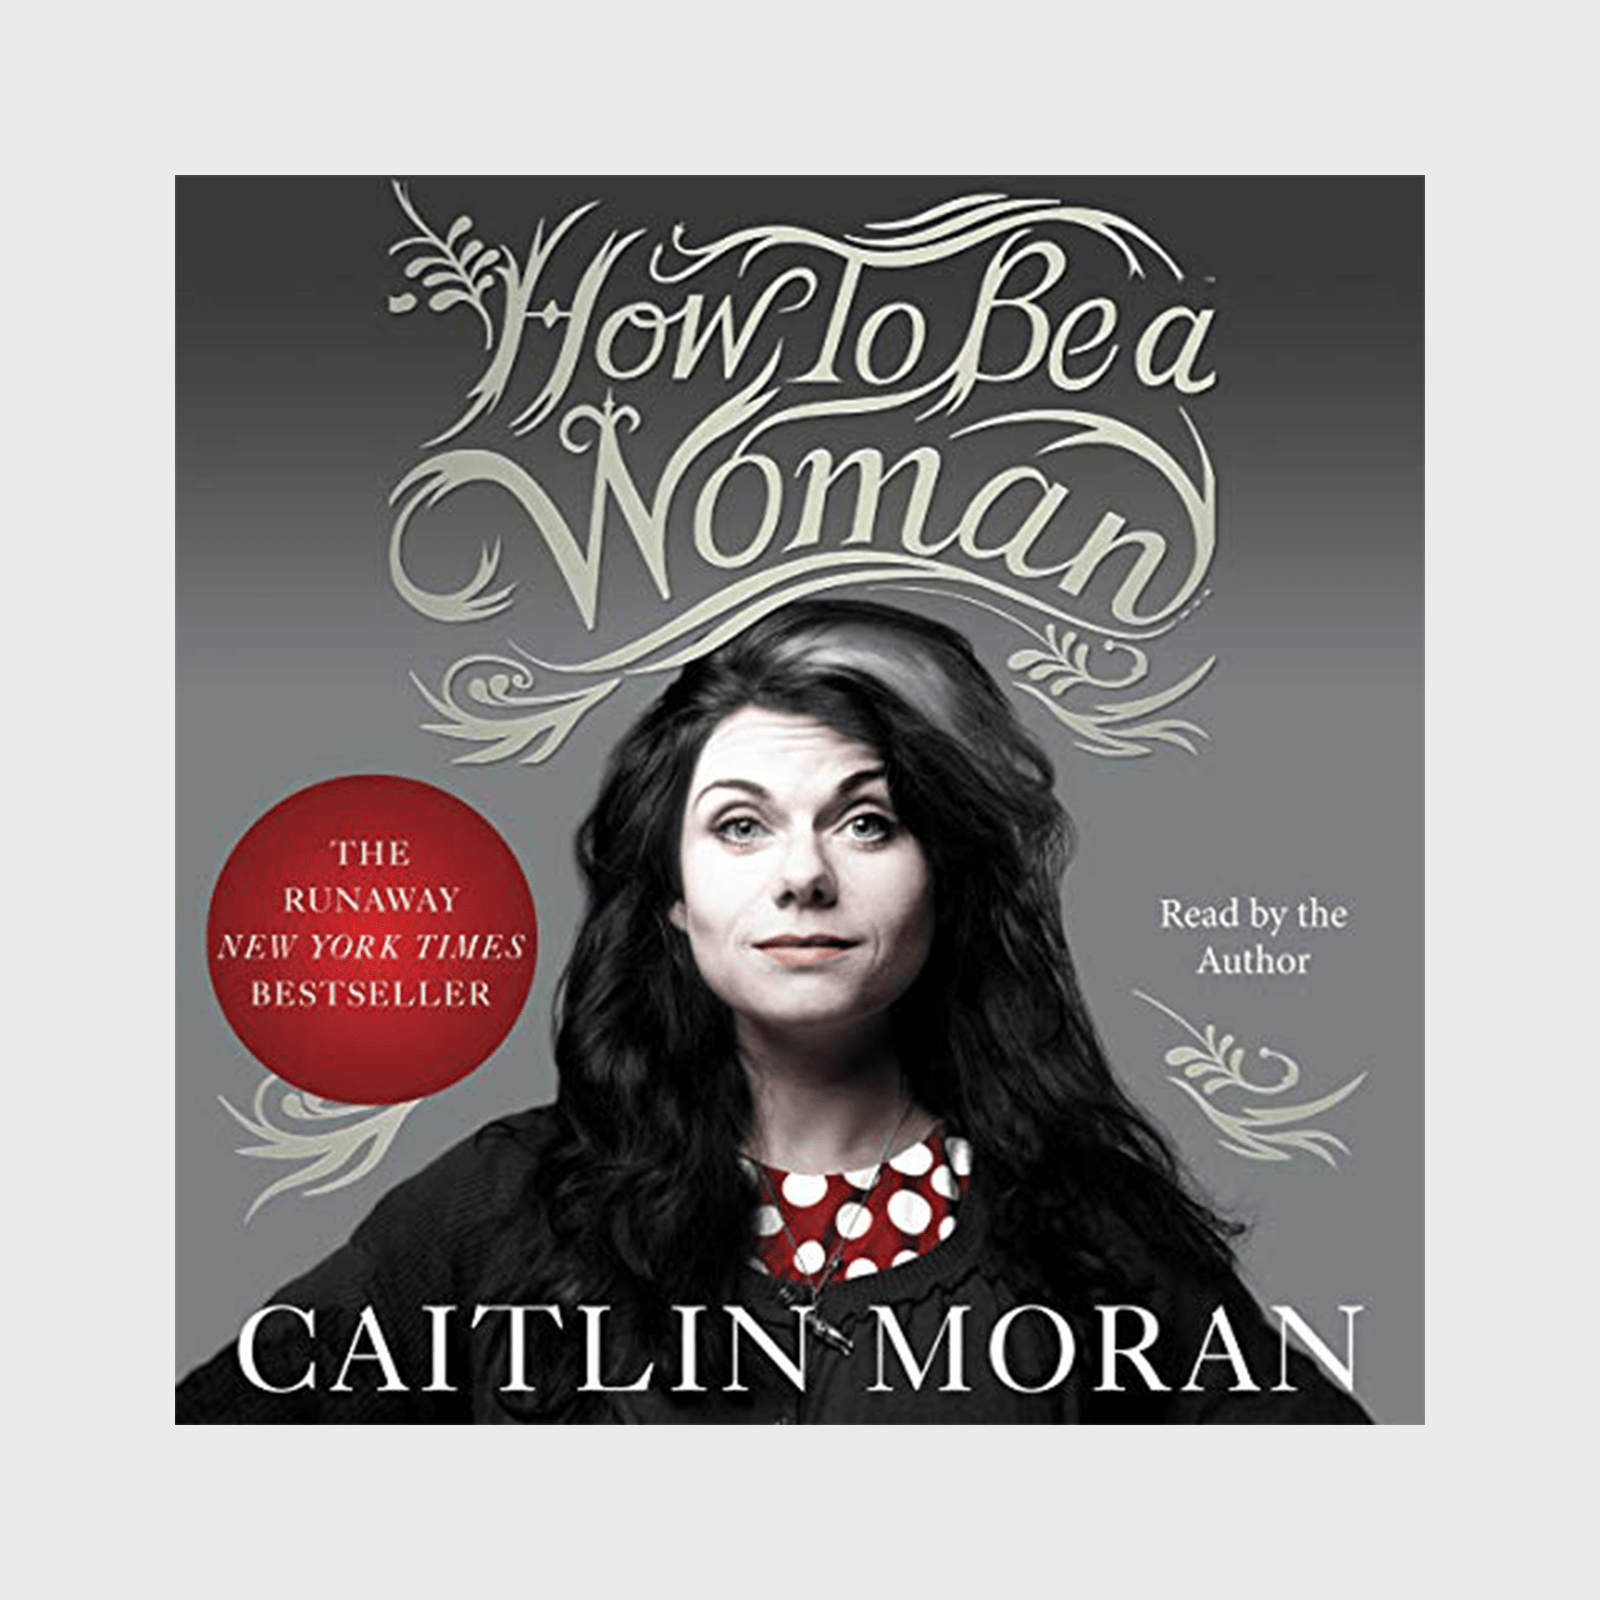 <h3><strong><em>How to Be a Woman </em>by Caitlin Moran</strong></h3> <p>Need some humorous empowerment during this weird time? Journalist, author, and narrator Caitlin Moran provides that in spades with one of the funniest <a href="https://www.rd.com/list/feminist-books/" rel="noopener noreferrer">feminist books</a> in recent memory. <a href="https://www.amazon.com/How-to-Be-Woman-Caitlin-Moran-audiobook/dp/B009GBXLBO/" rel="noopener noreferrer"><em>How to Be a Woman</em></a> is an exploration of how far women have come, how much further there is to go, and the seemingly endless "rules" for being a woman—and how to break them.</p> <p class="listicle-page__cta-button-shop"><a class="shop-btn" href="https://www.amazon.com/How-to-Be-Woman-Caitlin-Moran-audiobook/dp/B009GBXLBO/">Shop Now</a></p>